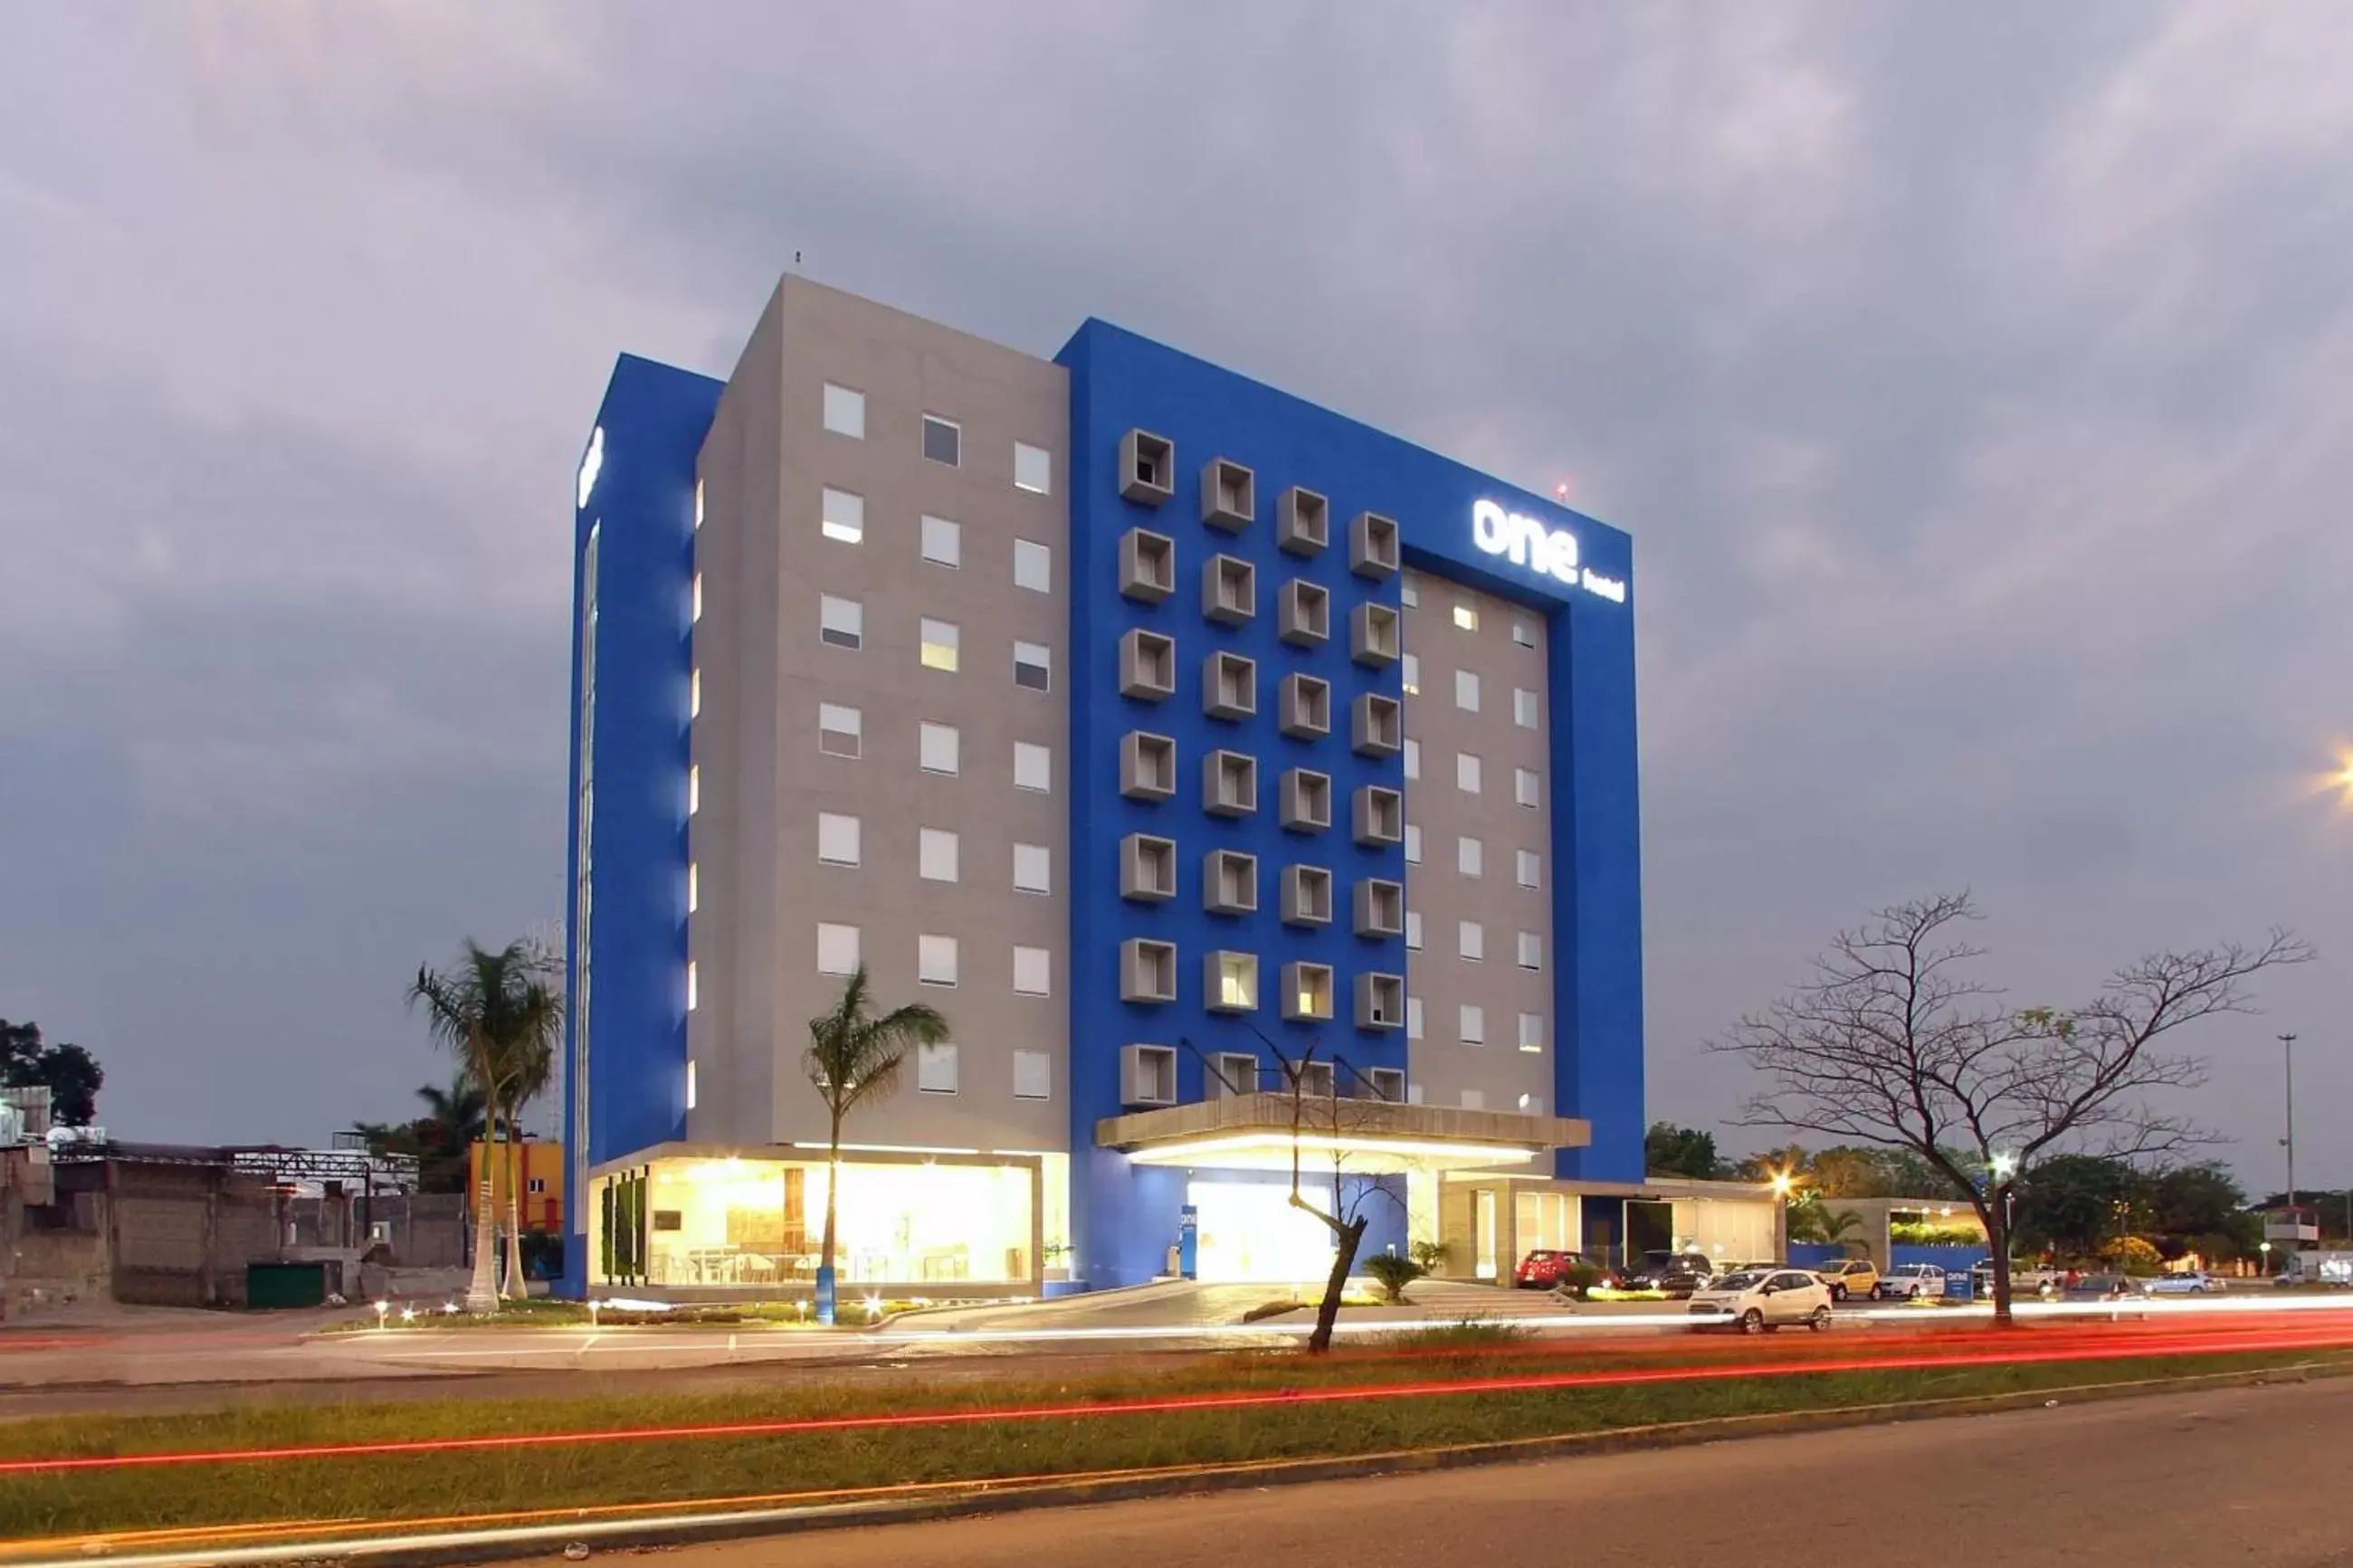 Property Building in One Villahermosa 2000